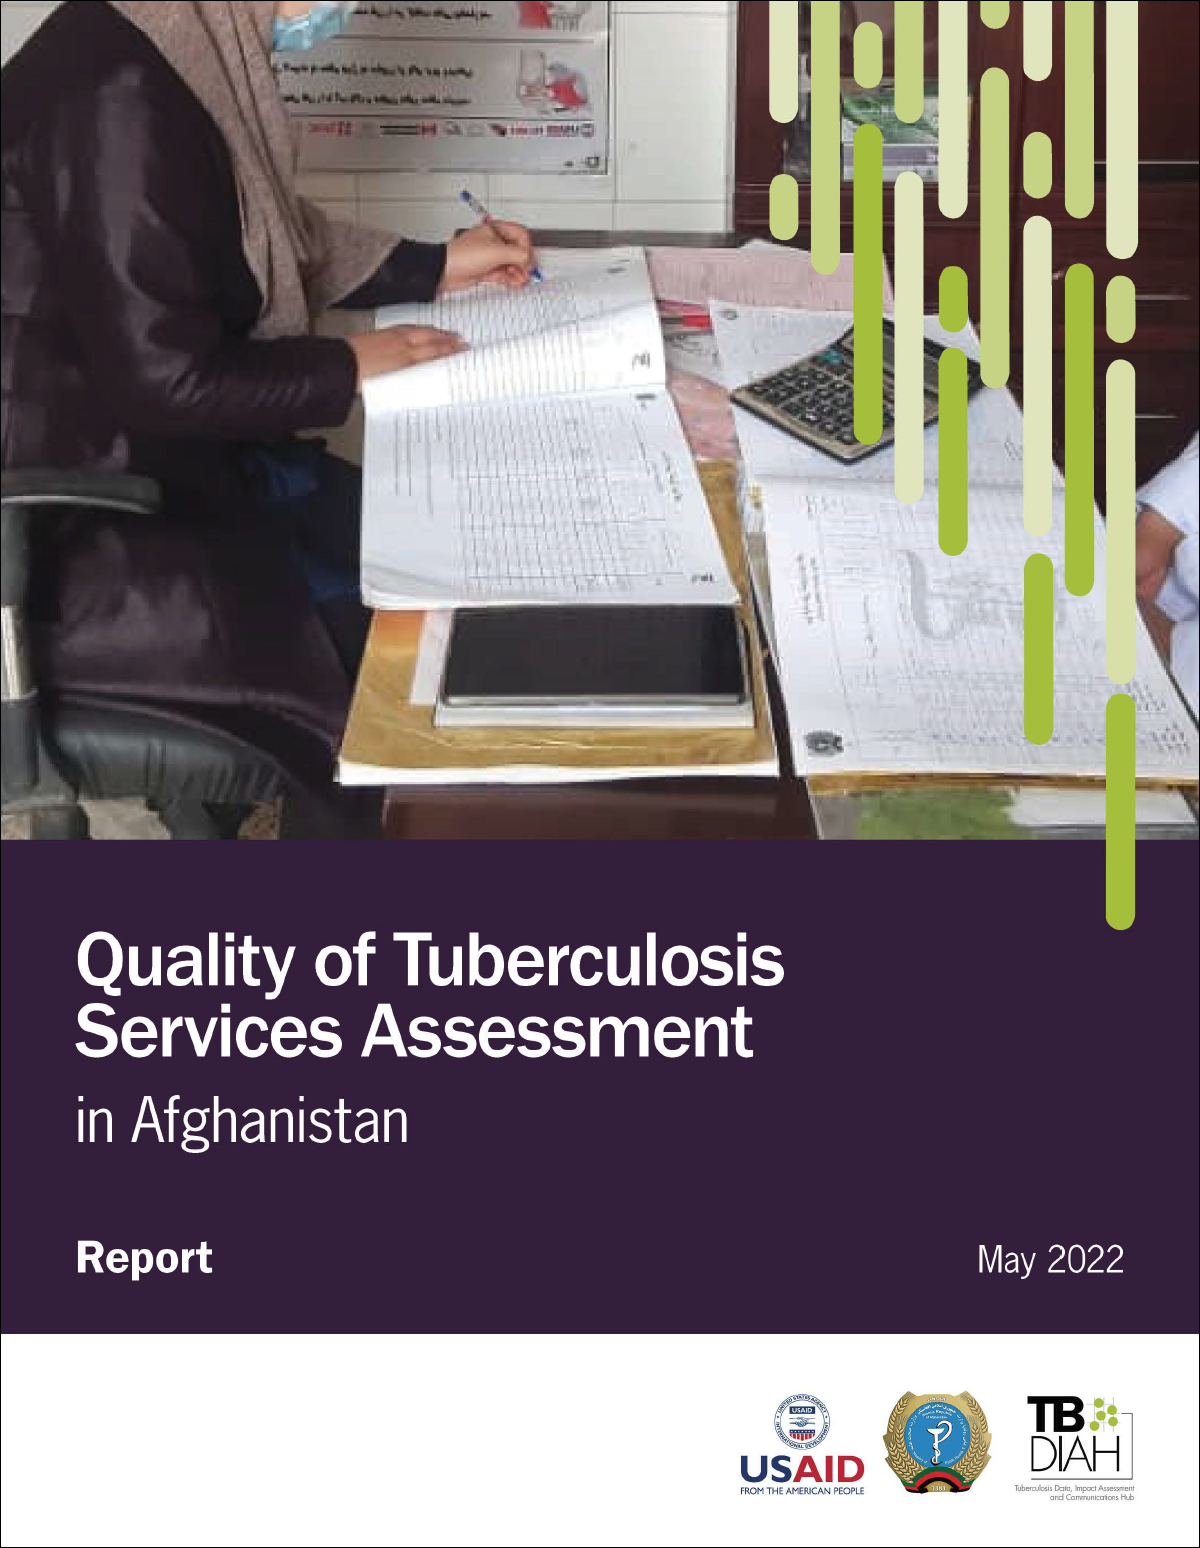 Quality of Tuberculosis Services Assessment in Afghanistan: Report